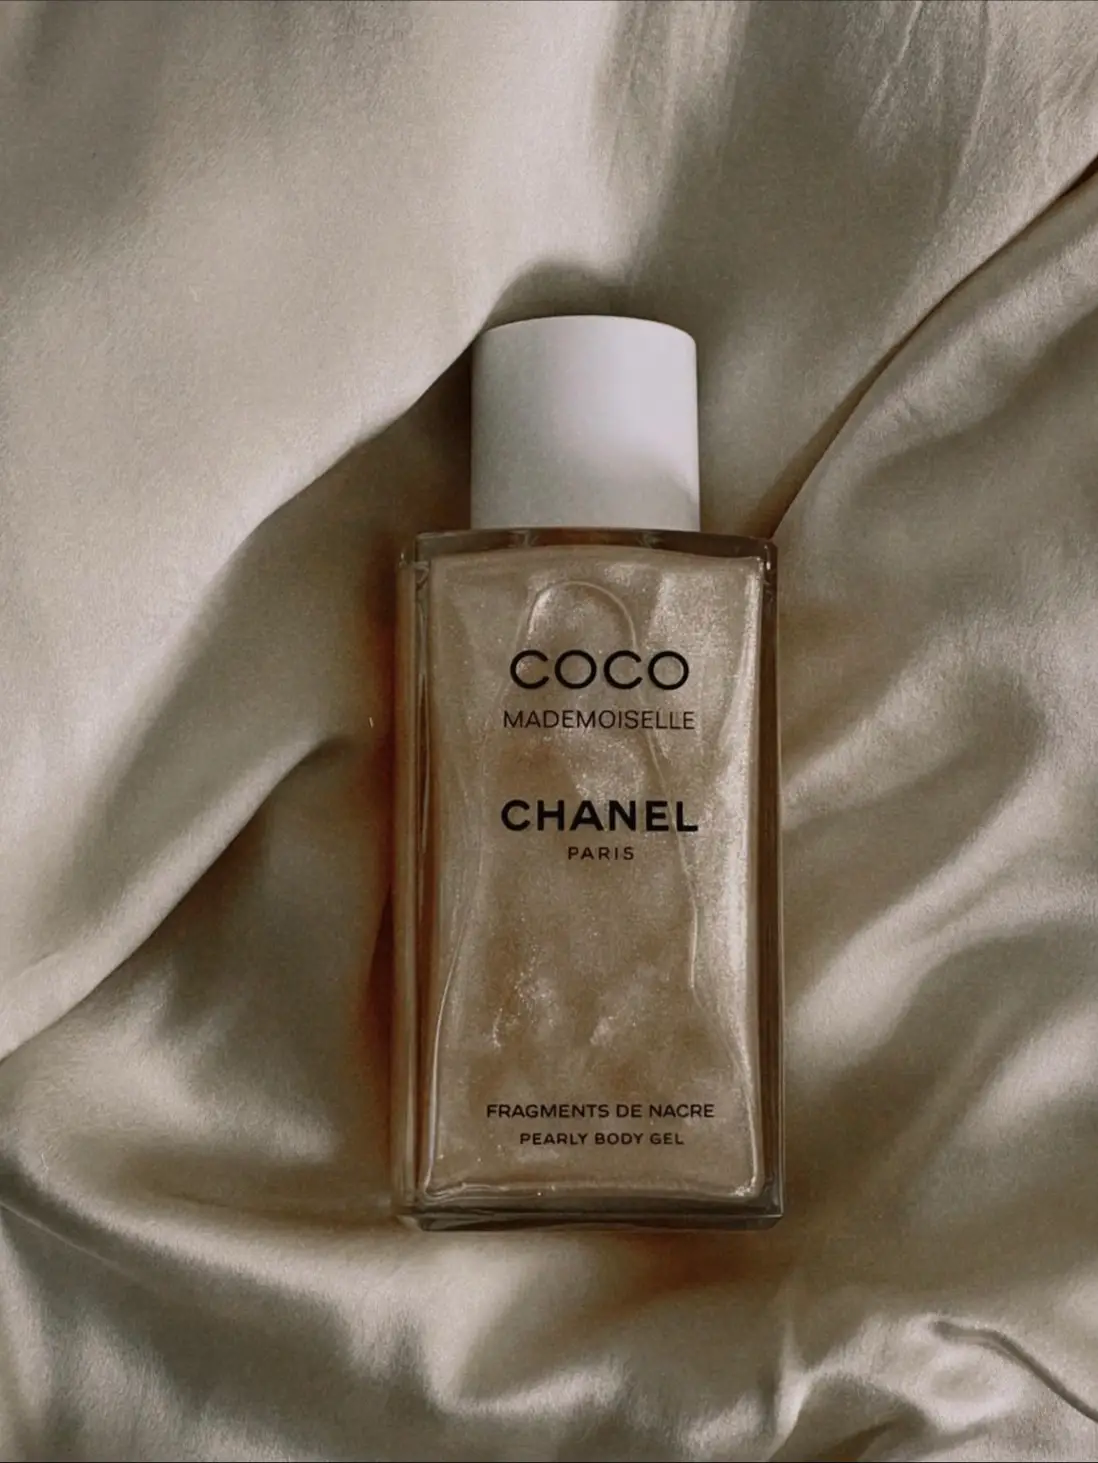 CHANEL COCO MADEMOISELLE Pearly Body Gel -Iridescent 250 ml. Limited  Edition £85.00 - PicClick UK